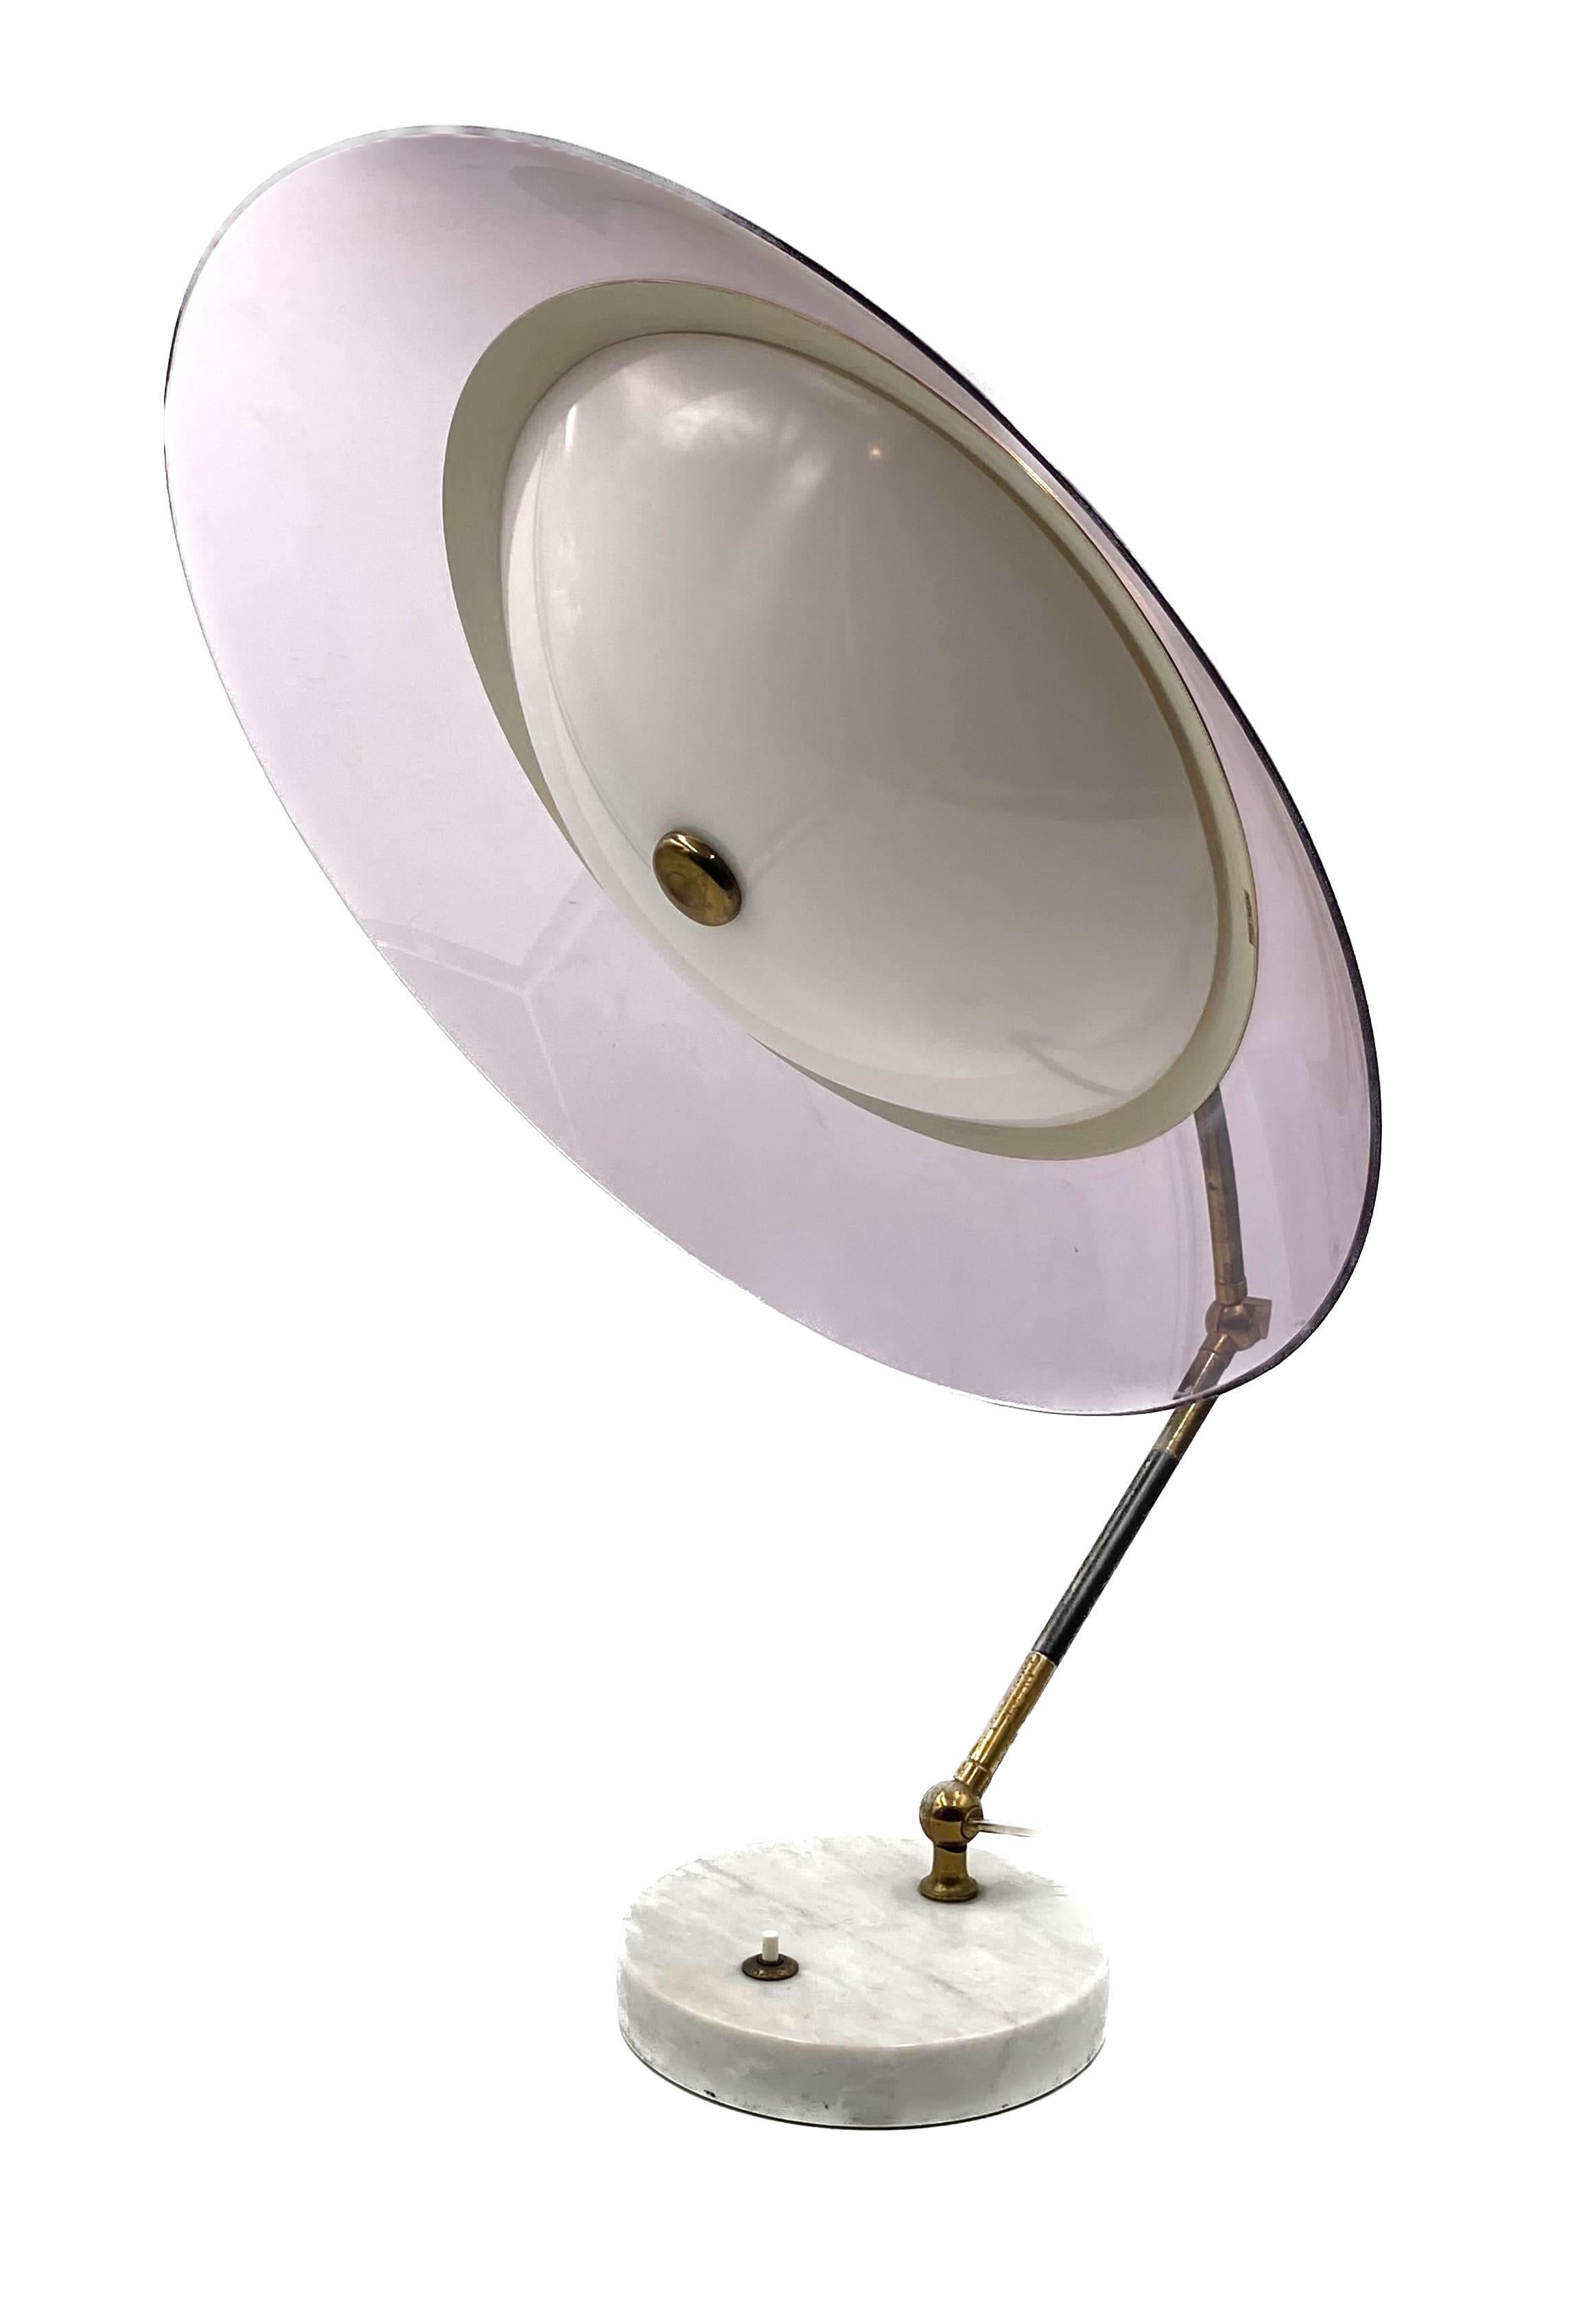 Stilux, mod. Orleans dome table lamp, Stilux Milano Italy, 1955 For Sale 11